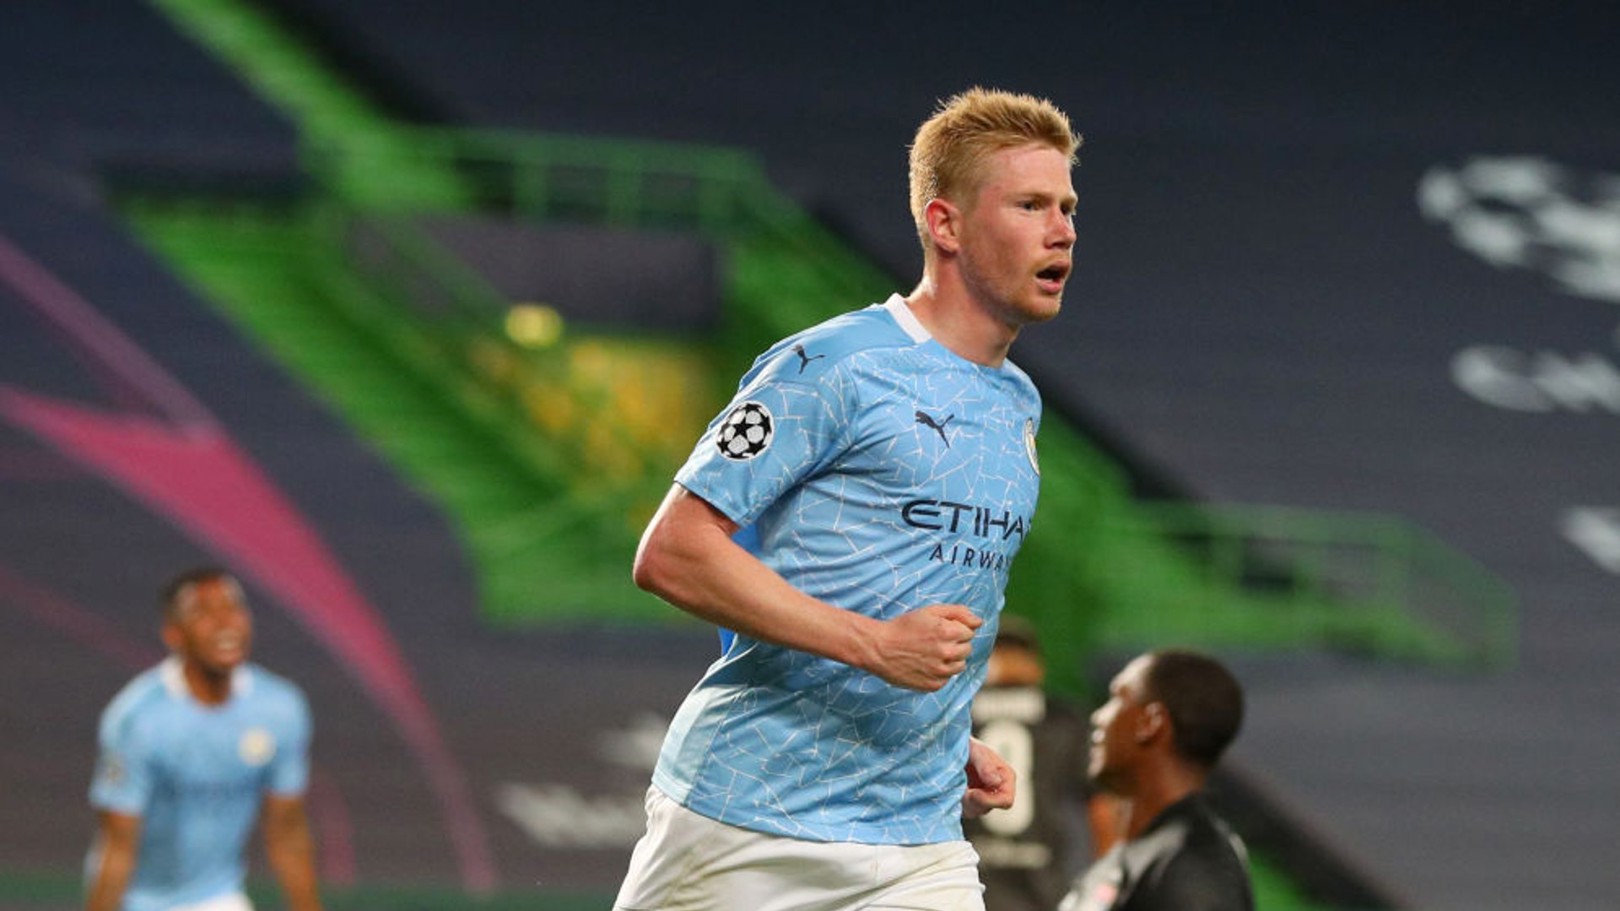 De Bruyne reveals why he aims to work harder than his teammates